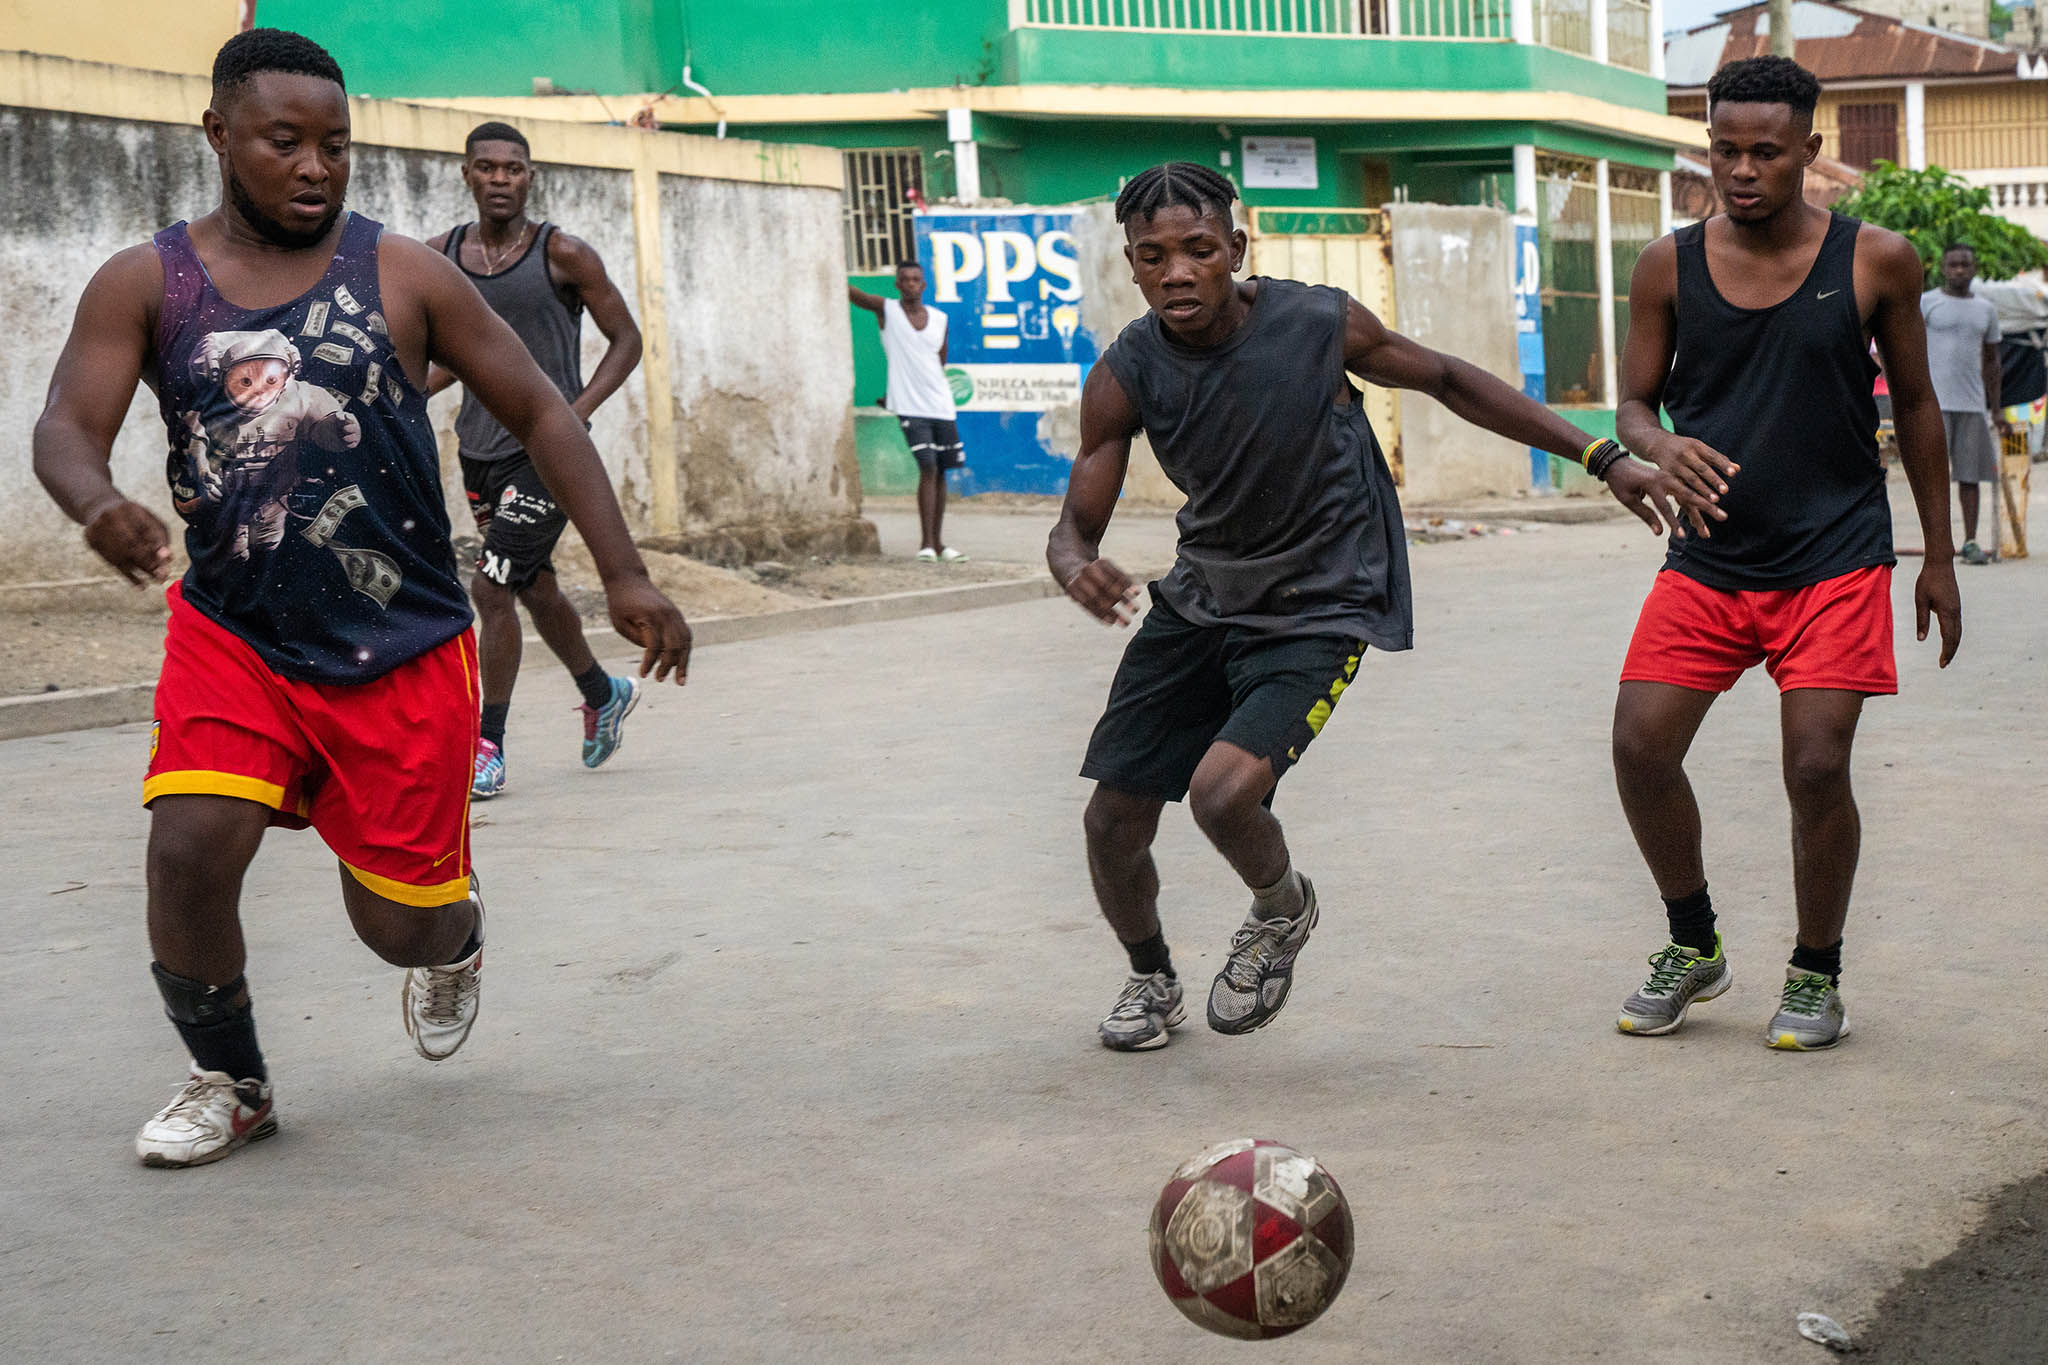 People play soccer in the streets in Trou-du-Nord, Haiti, on July 15, 2021. Even as civil society has grown more diverse and dynamic, no political outlet has been developed to channel its energy. (Federico Rios/The New York Times)